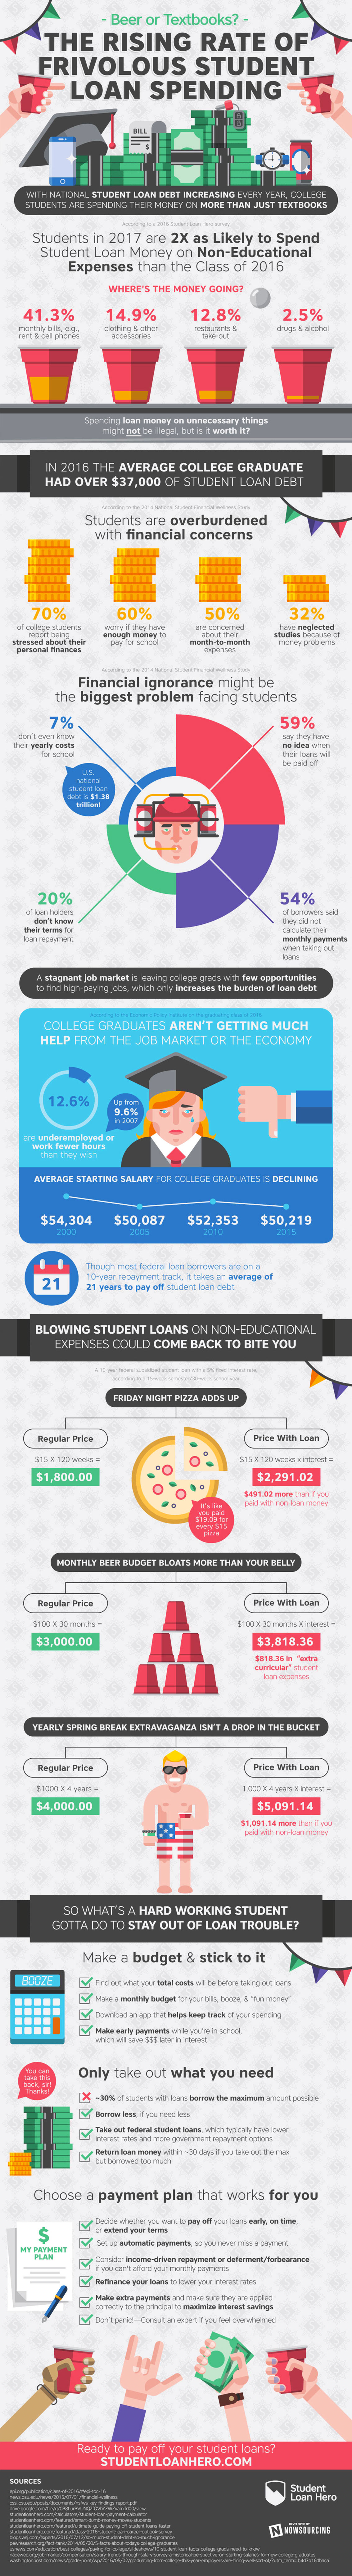 Frivolous Spending of Student Loans On Other Things - College Debt Infographic